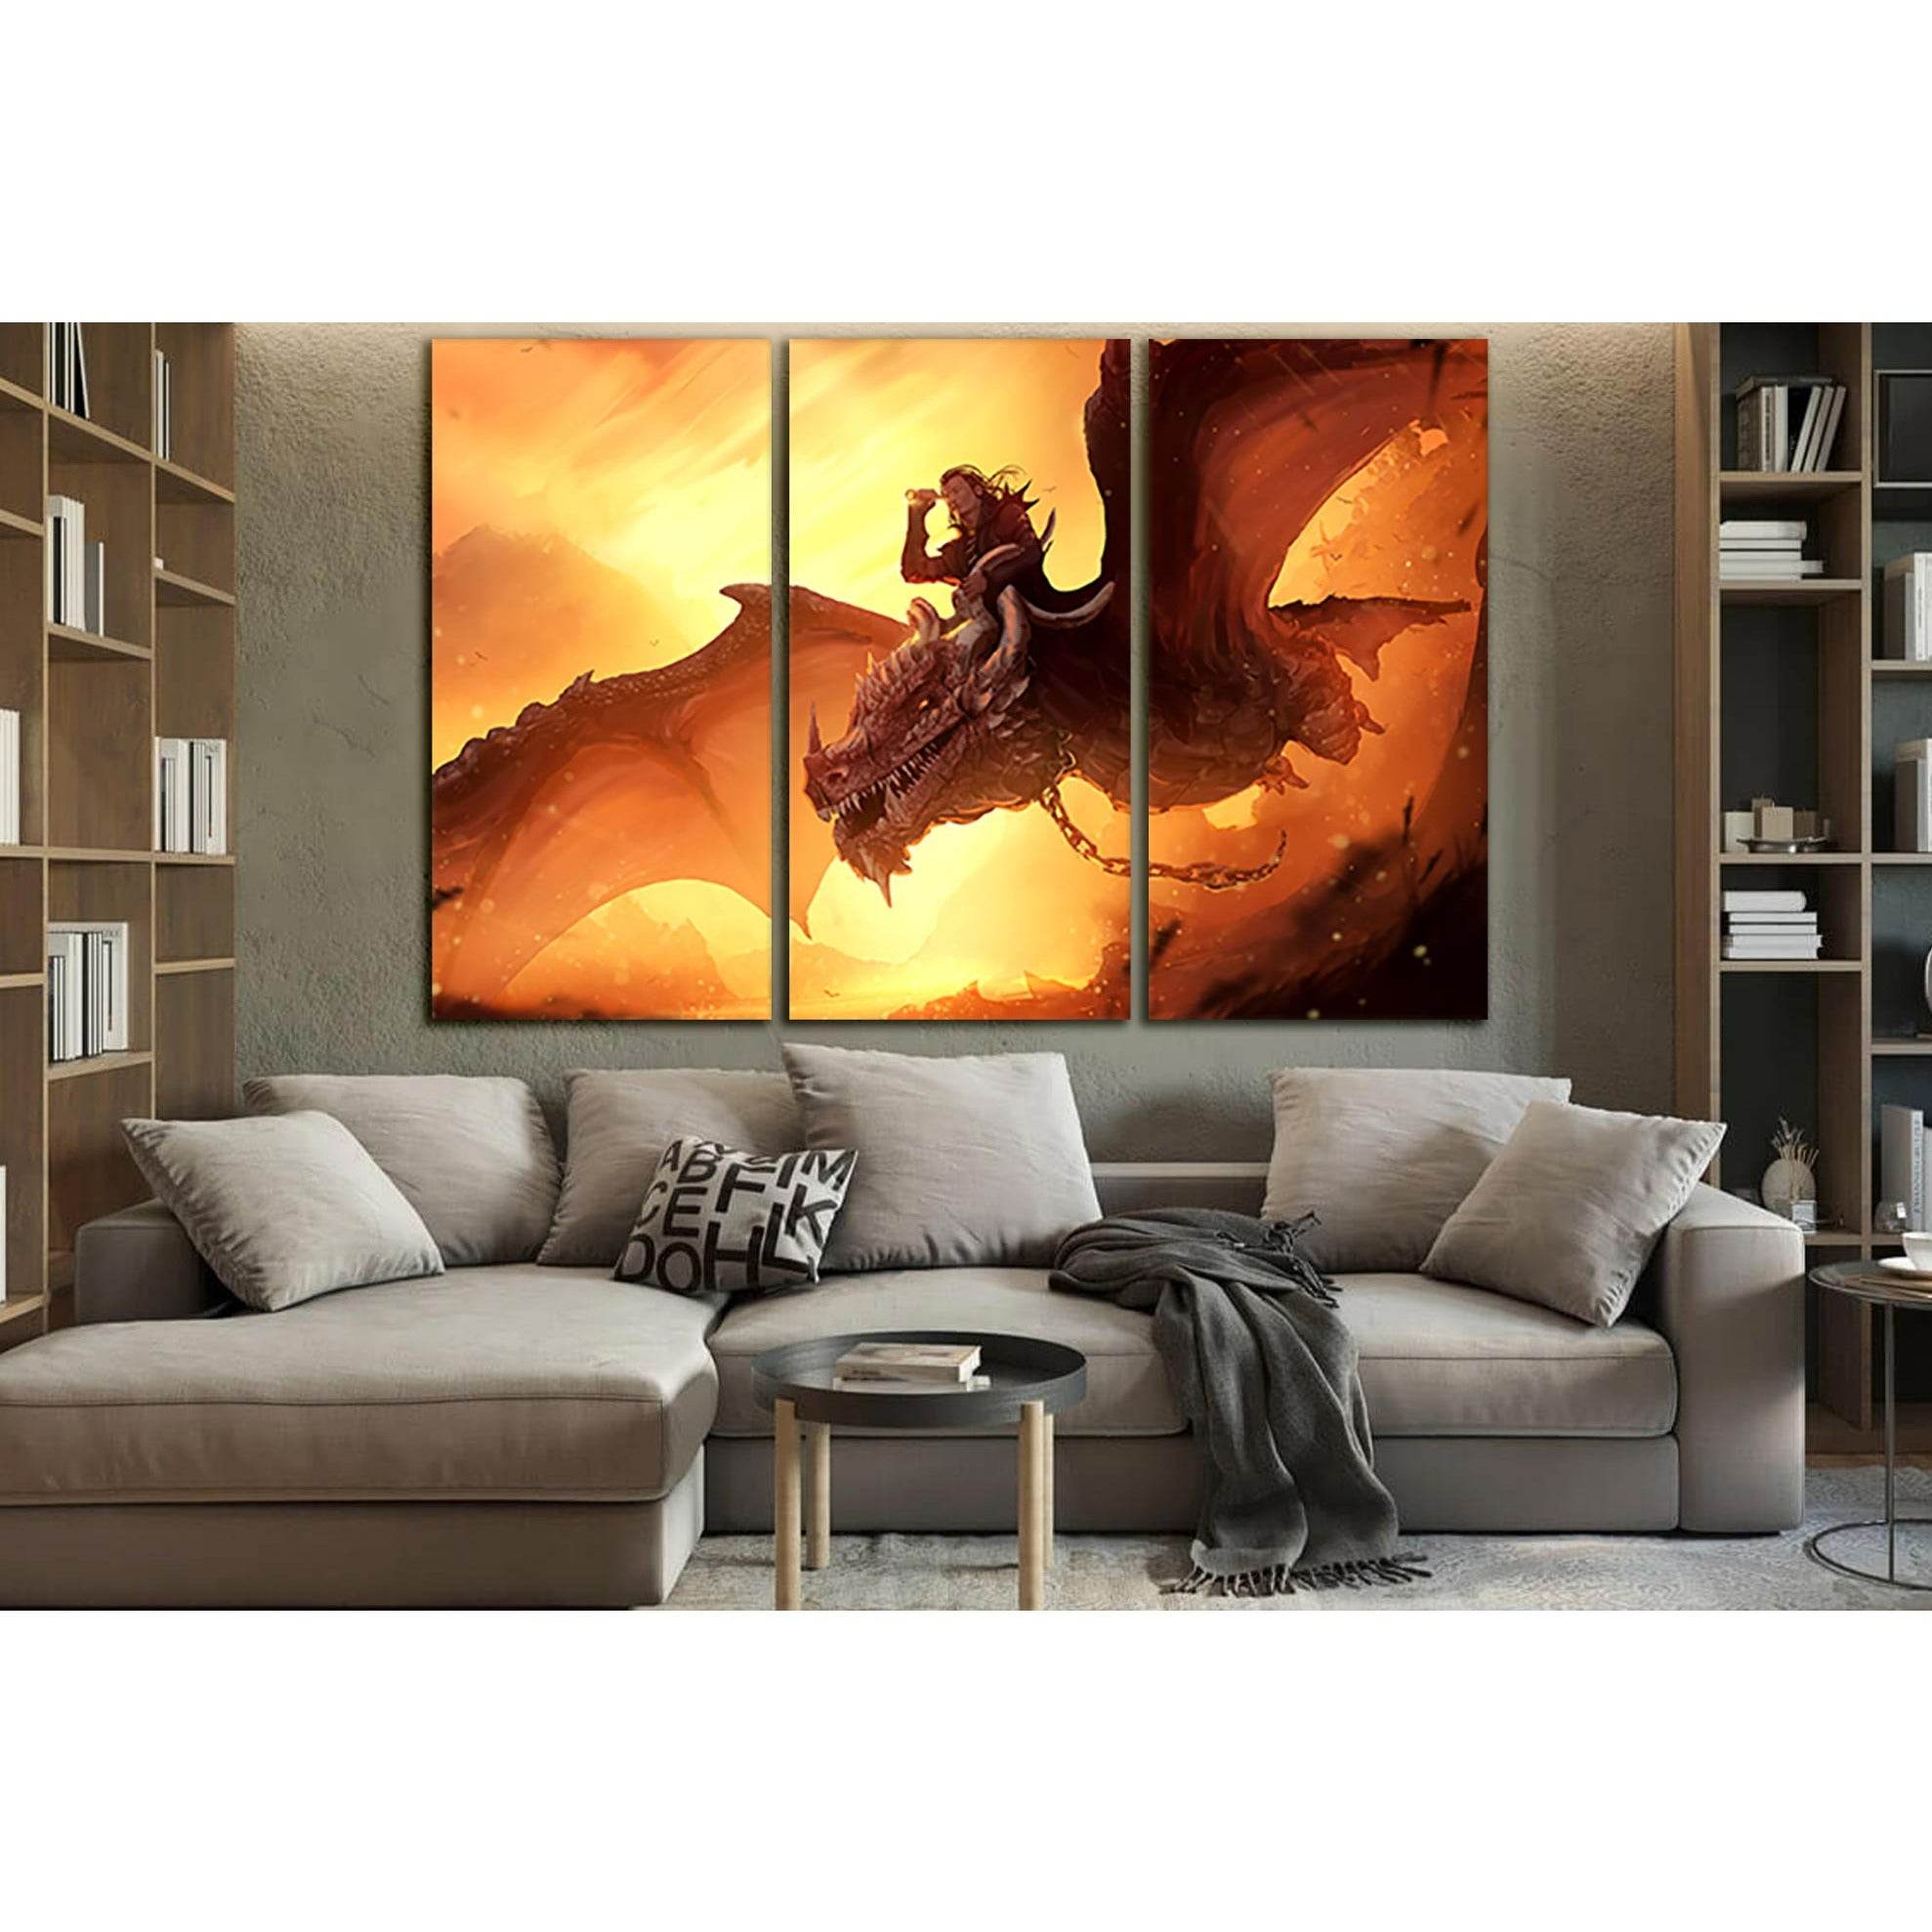 Researcher Flies On The Dragon №SL1240 Ready to Hang Canvas Print